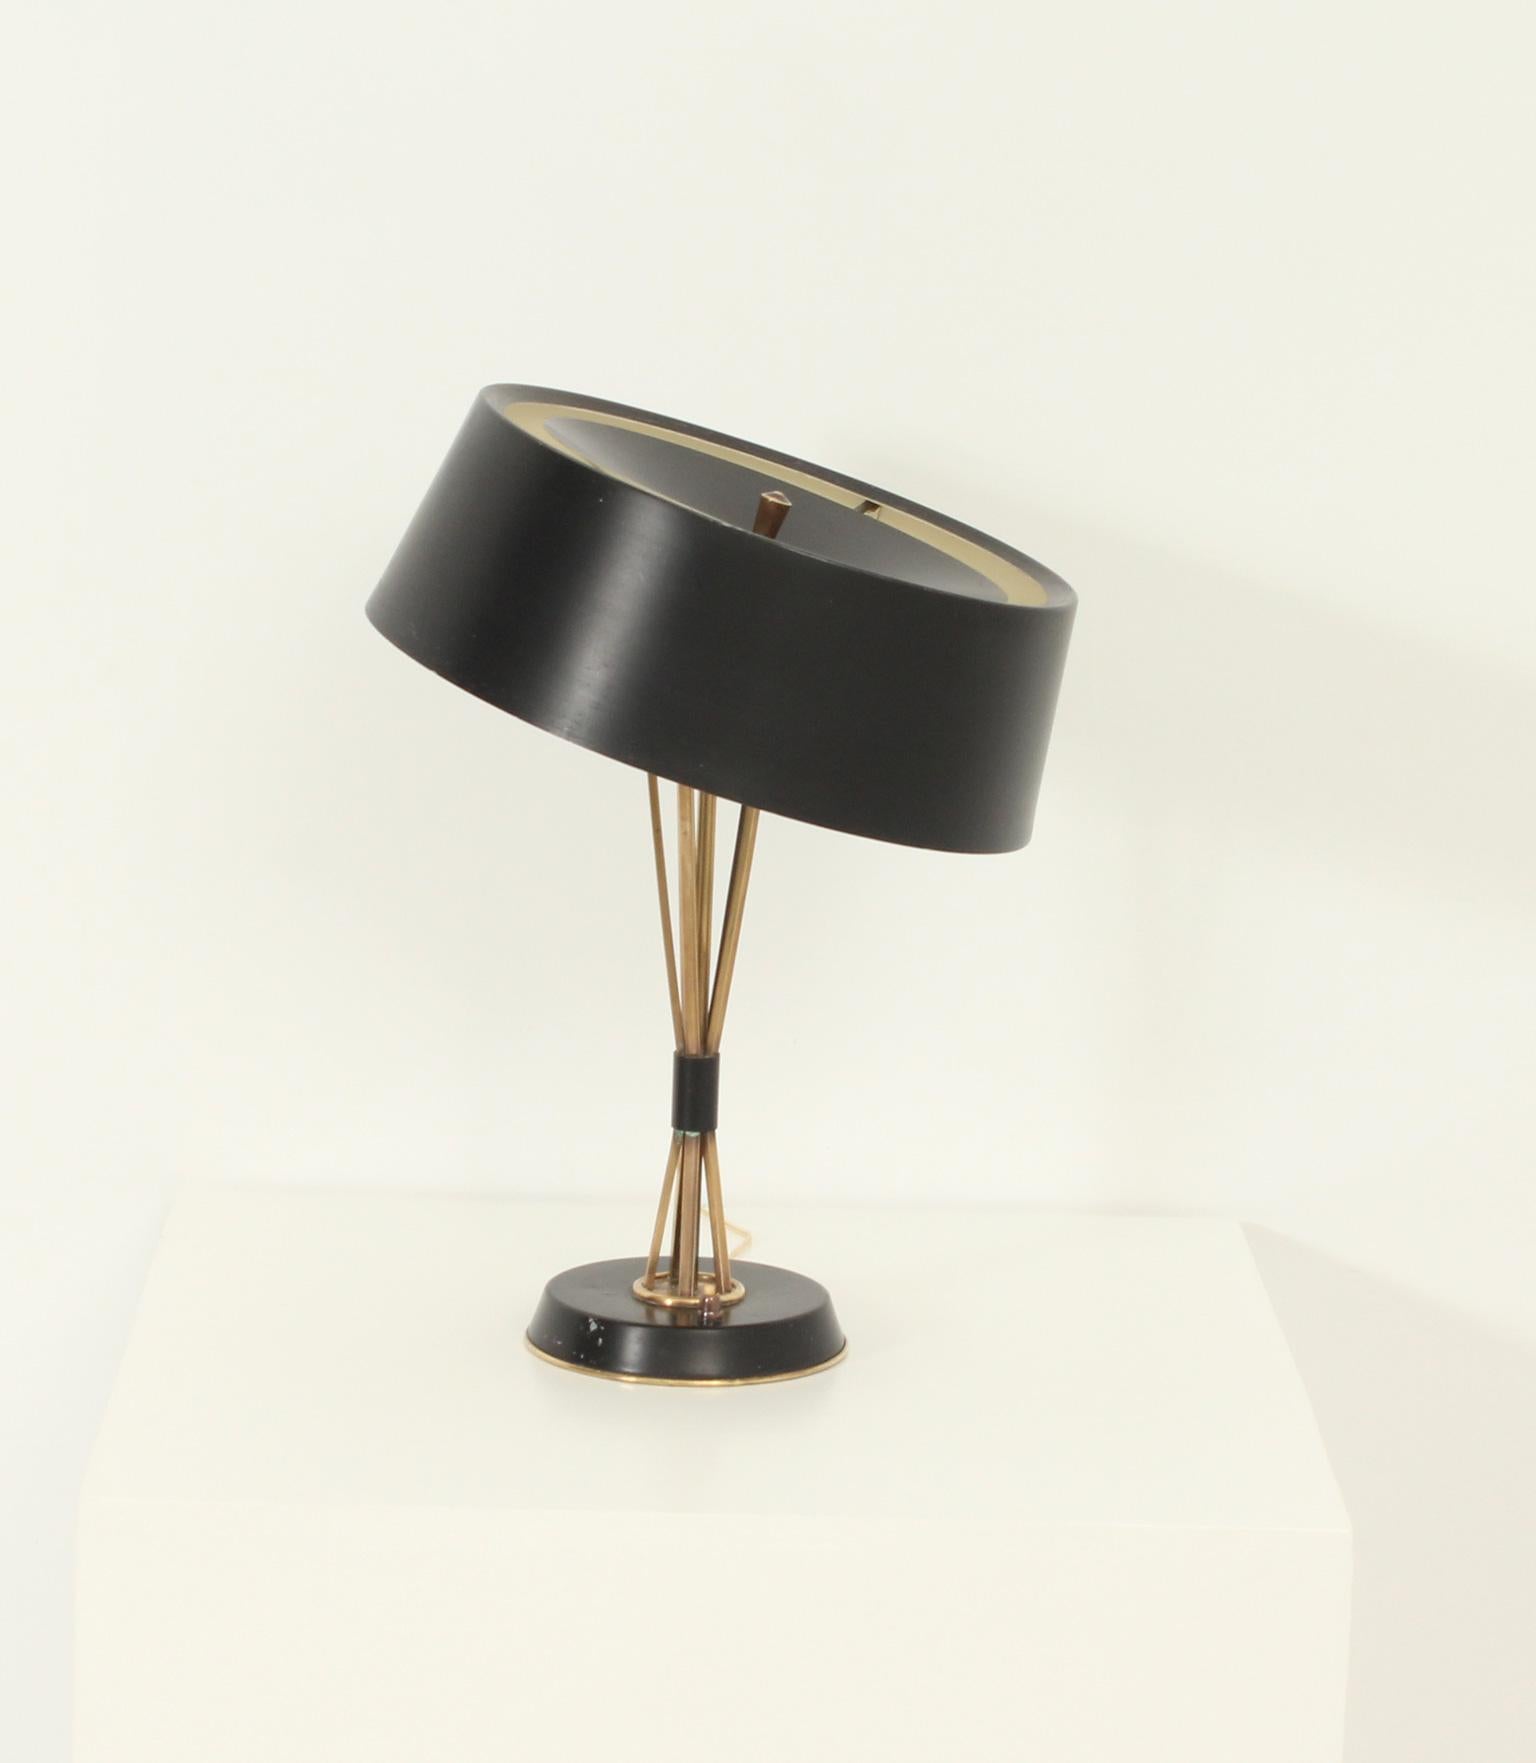 Large table lamp designed by Oscar Torlasco for Lumi, Italy 1960's. Adjustable shade that can take different positions. Shade and base in black lacquered aluminum and brass stem and details.